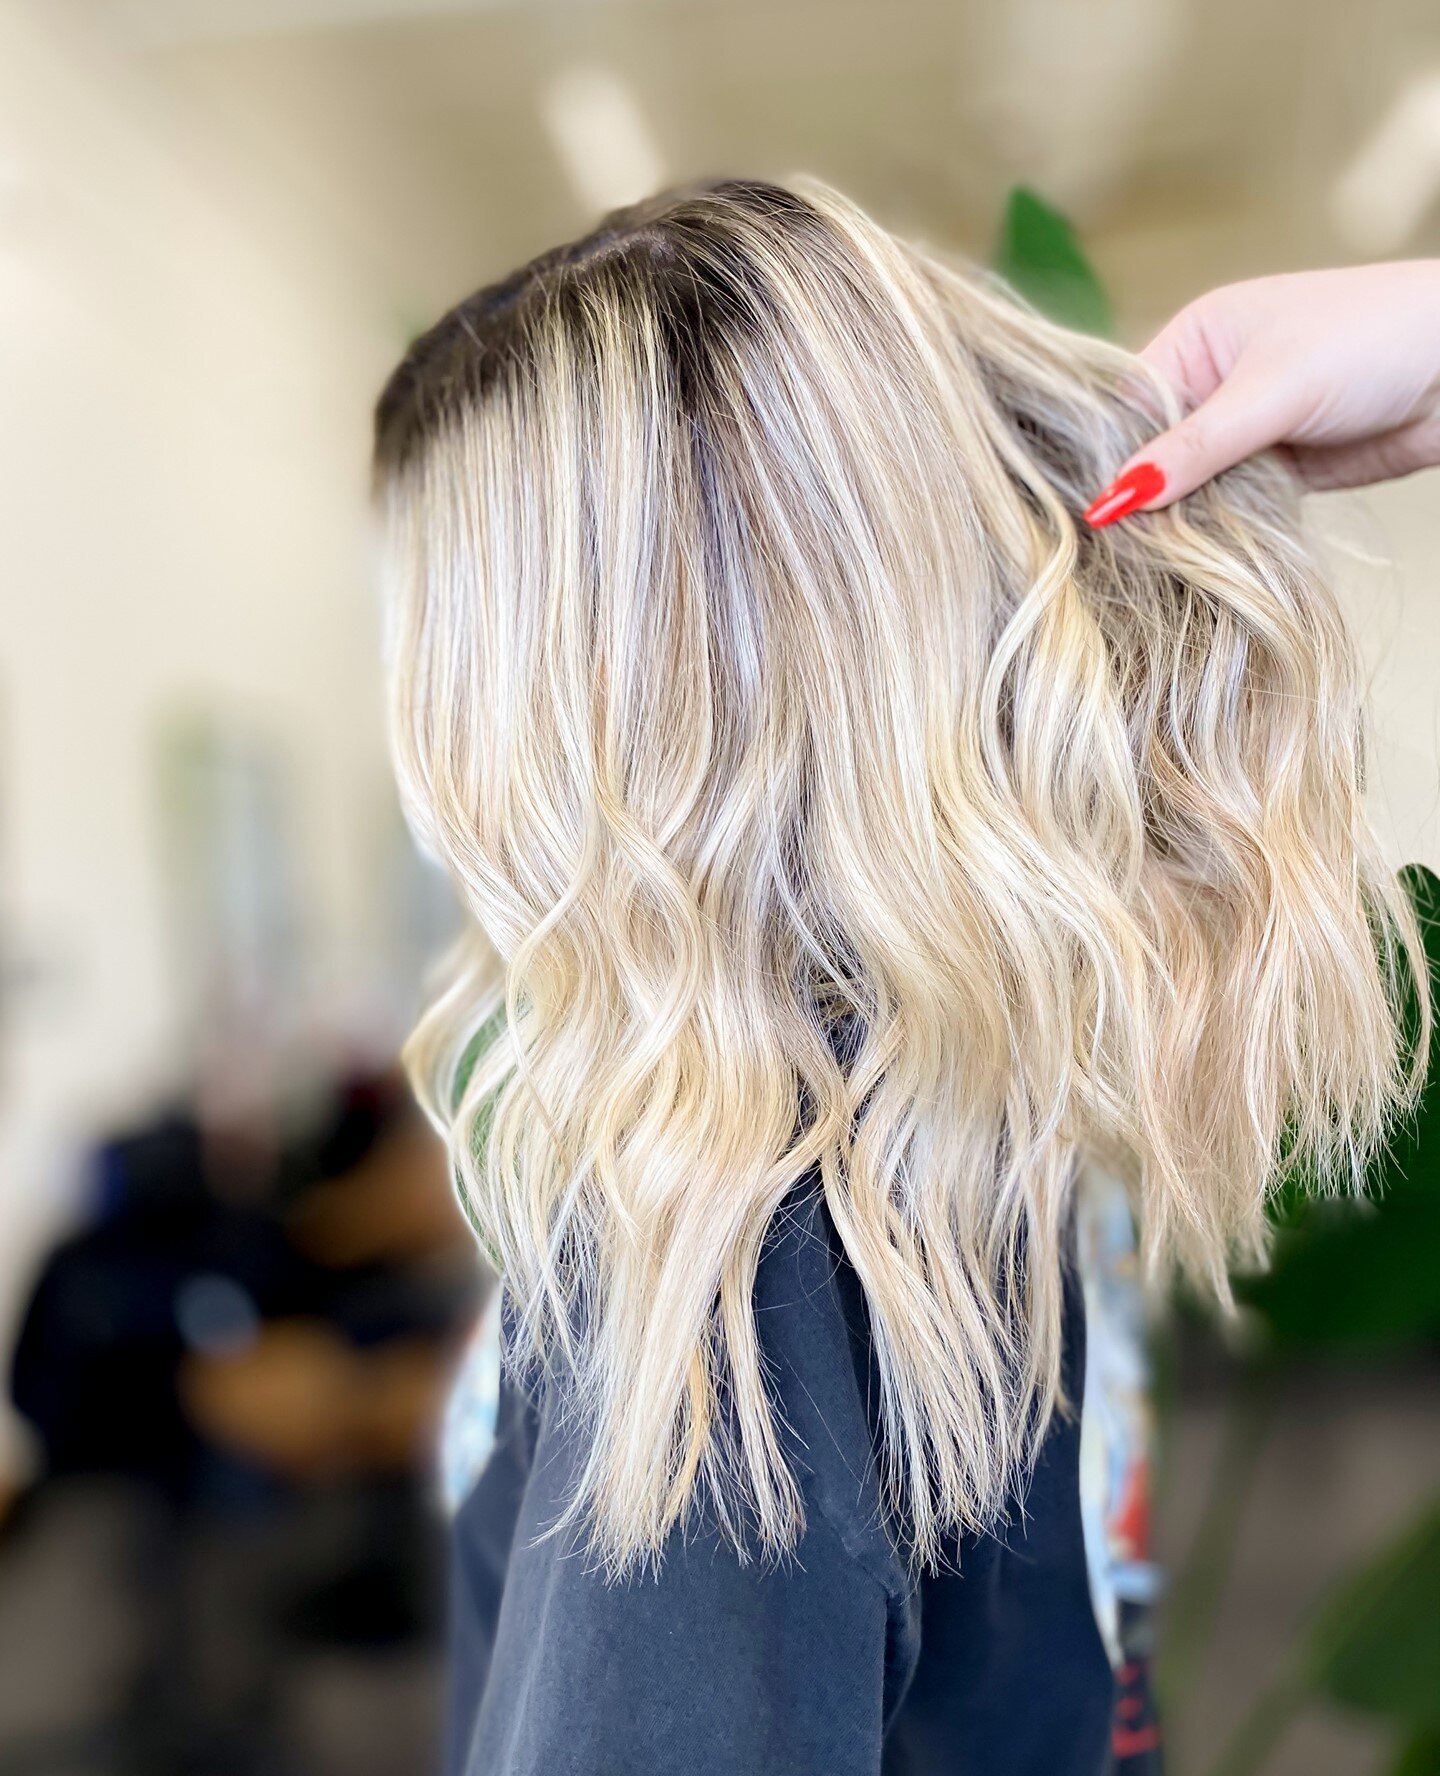 Raise your hand if you&rsquo;re as obsessed with this platinum vibe as we are 🙋🏻&zwj;♀️ #glamourax
.
.
.
.
.
#hairdressersthatslay #scissorovercomb #hairdressersjournal #fashion #hairshows #salonlife #creativecut #healthyhair #barbers #creativehair